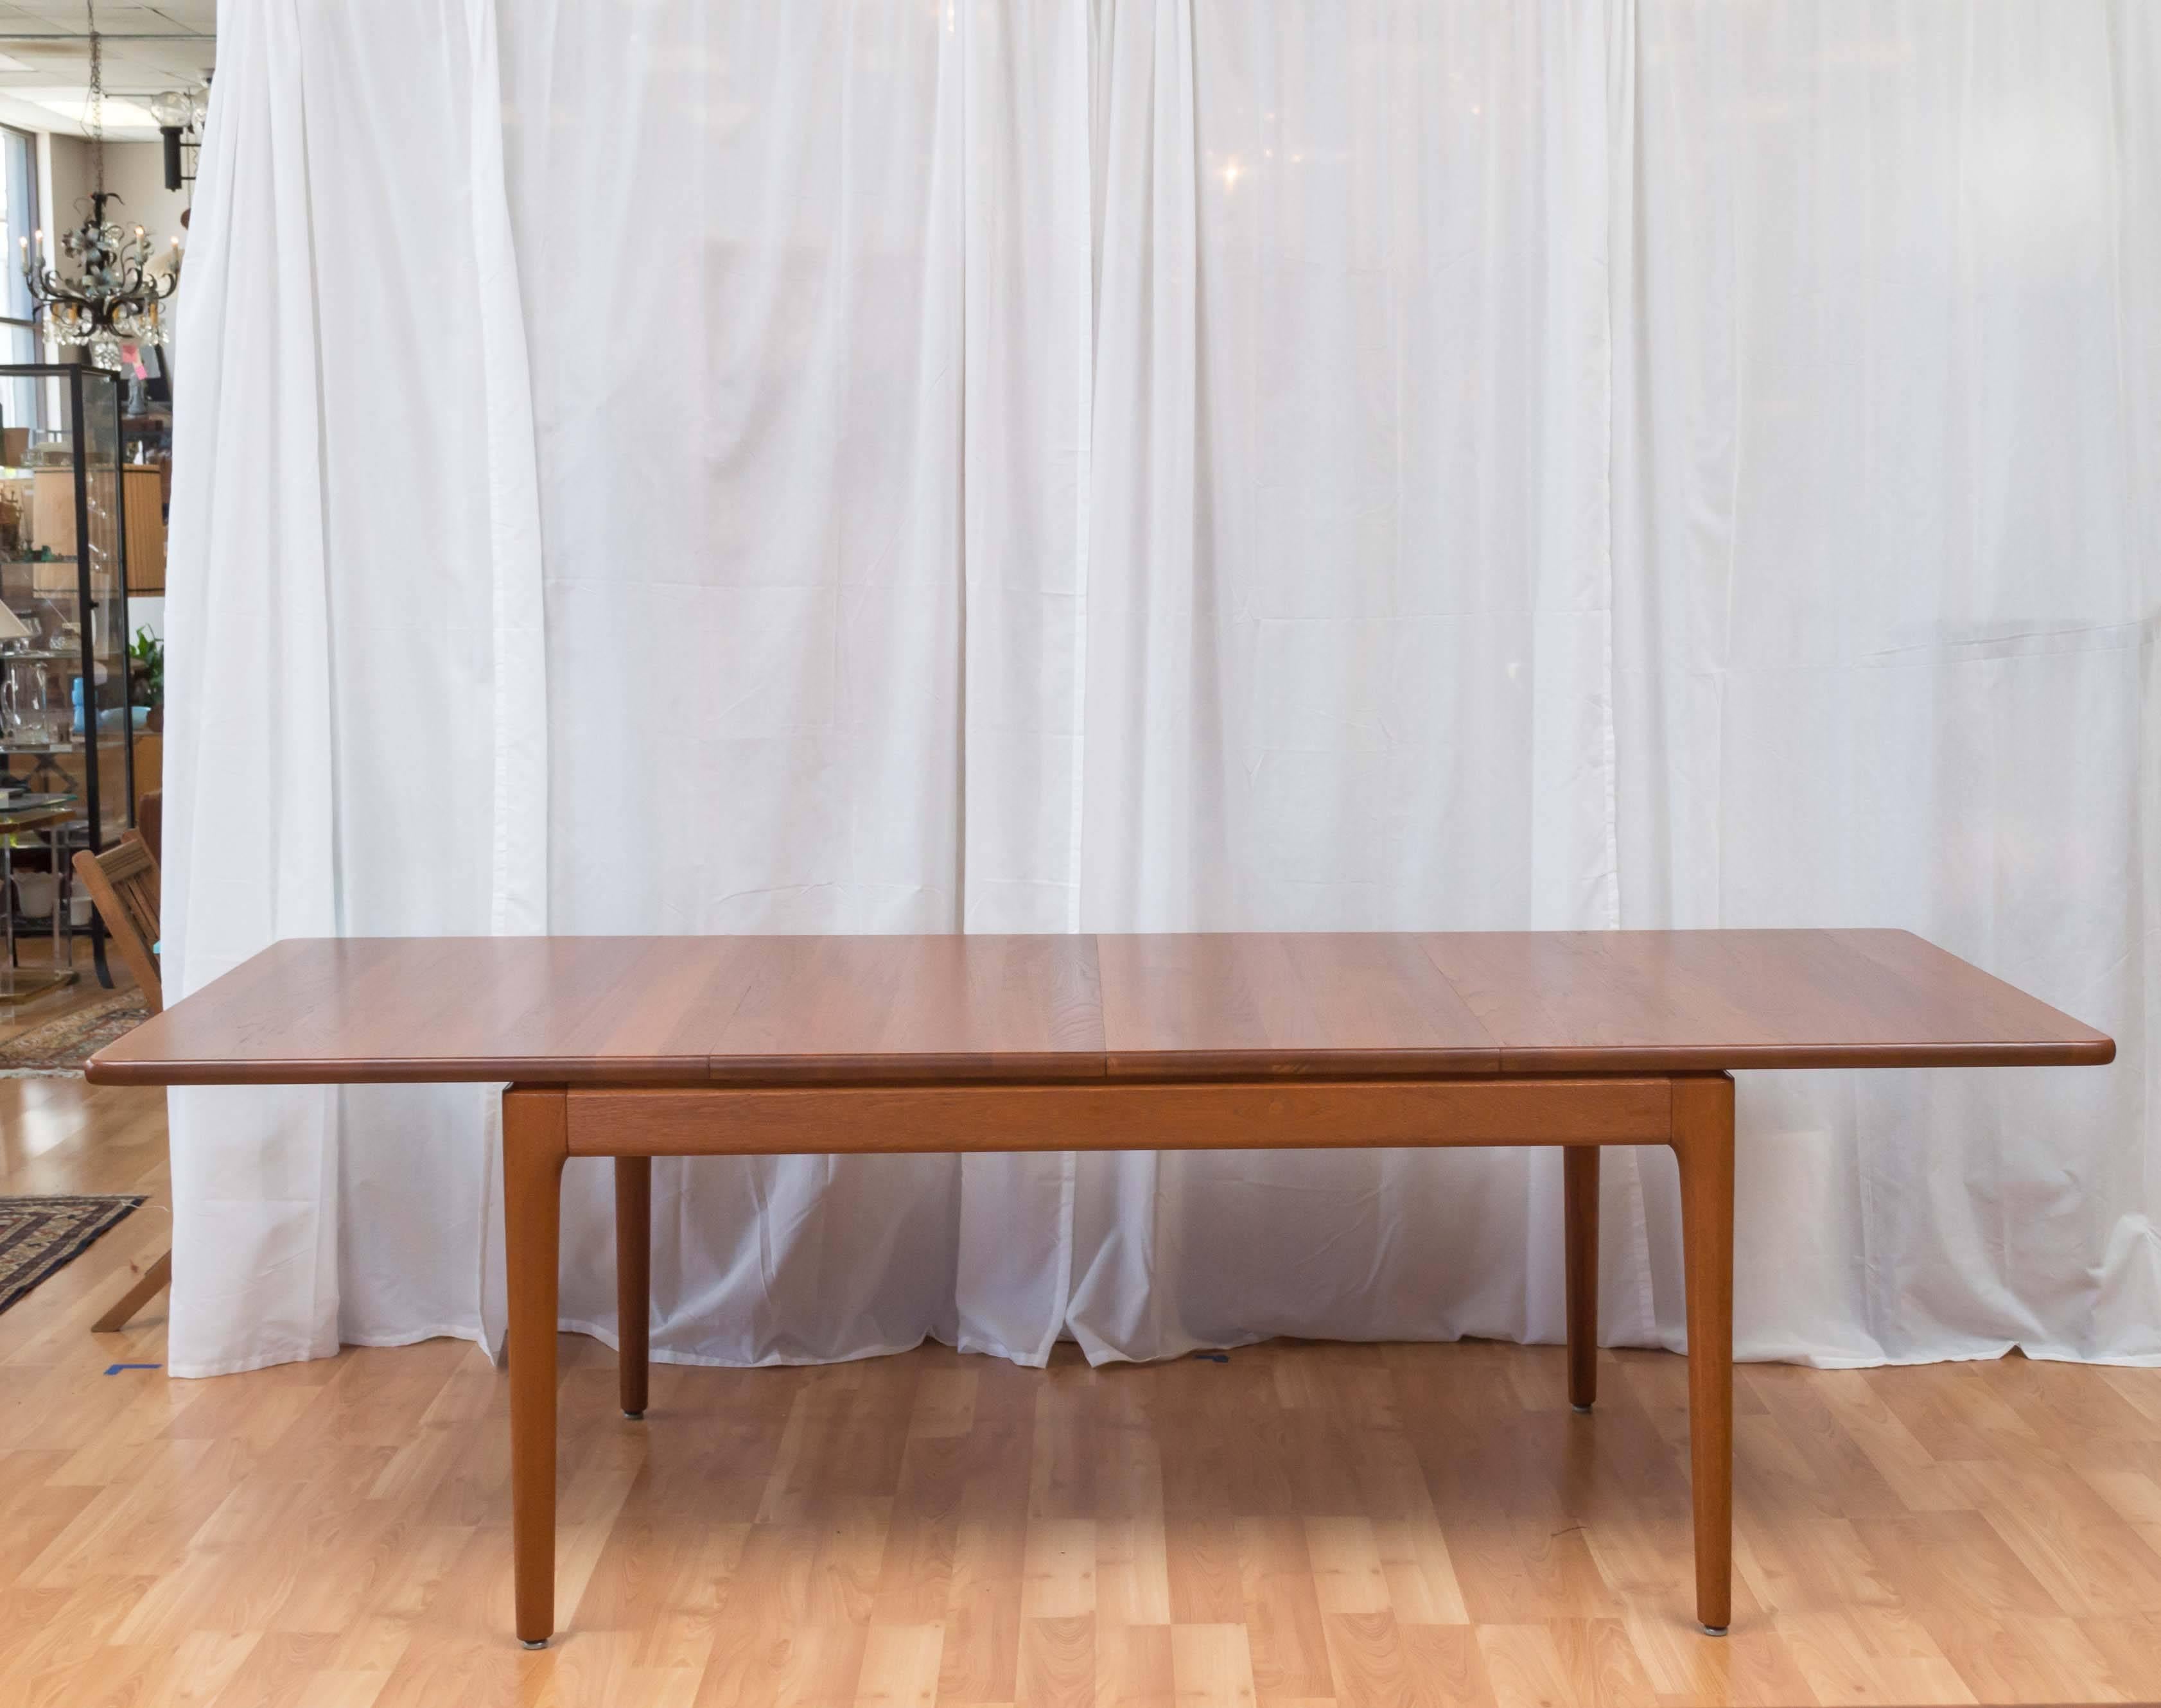 Stunning and large, teak Danish modern dining table, by Glostrup. Table is made of solid teak, which is unusual, most times you'll find the Danish tables to be a veneer. Has two leaves, that you can store under the tabletop when not in use. A